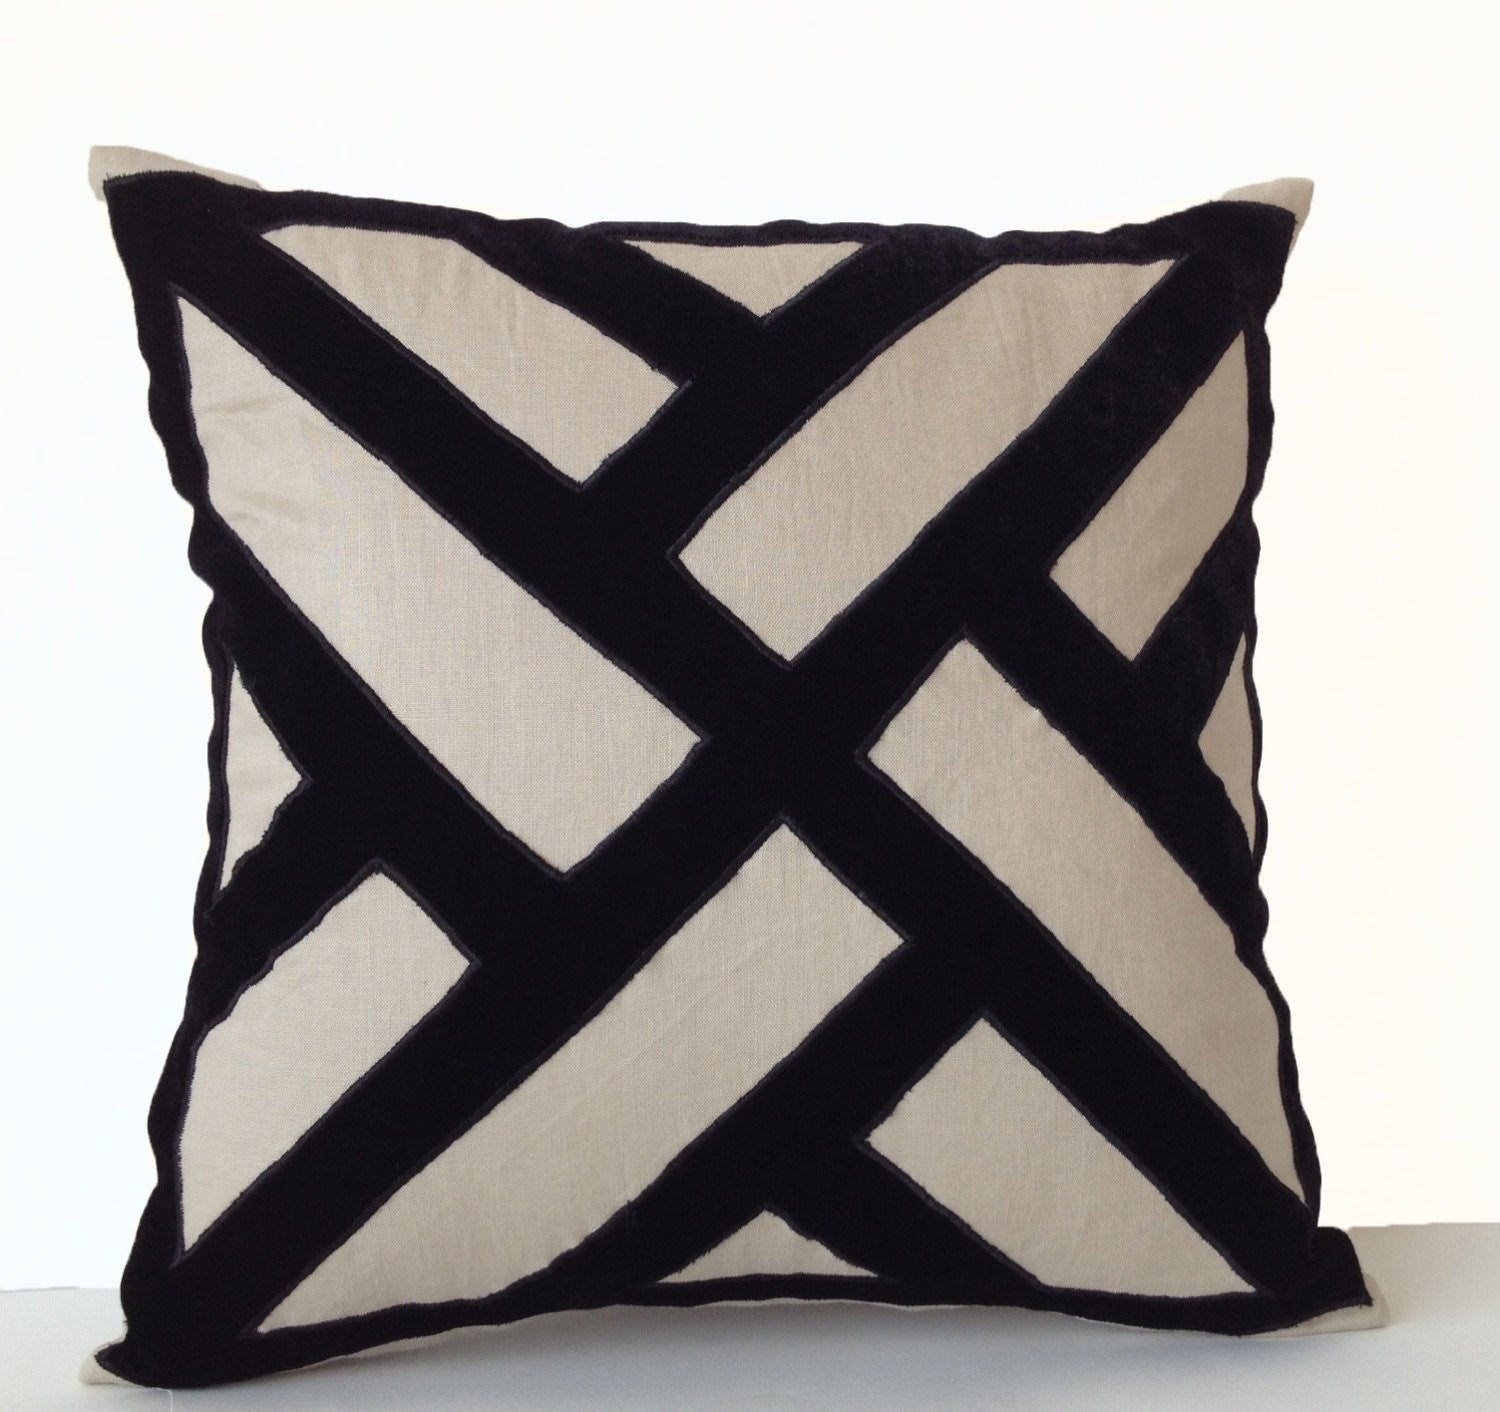 Amore Beaute  pillow cover is great even as a standalone accent piece or can be used to creatively tie in other décor pieces particularly abstract art objects.